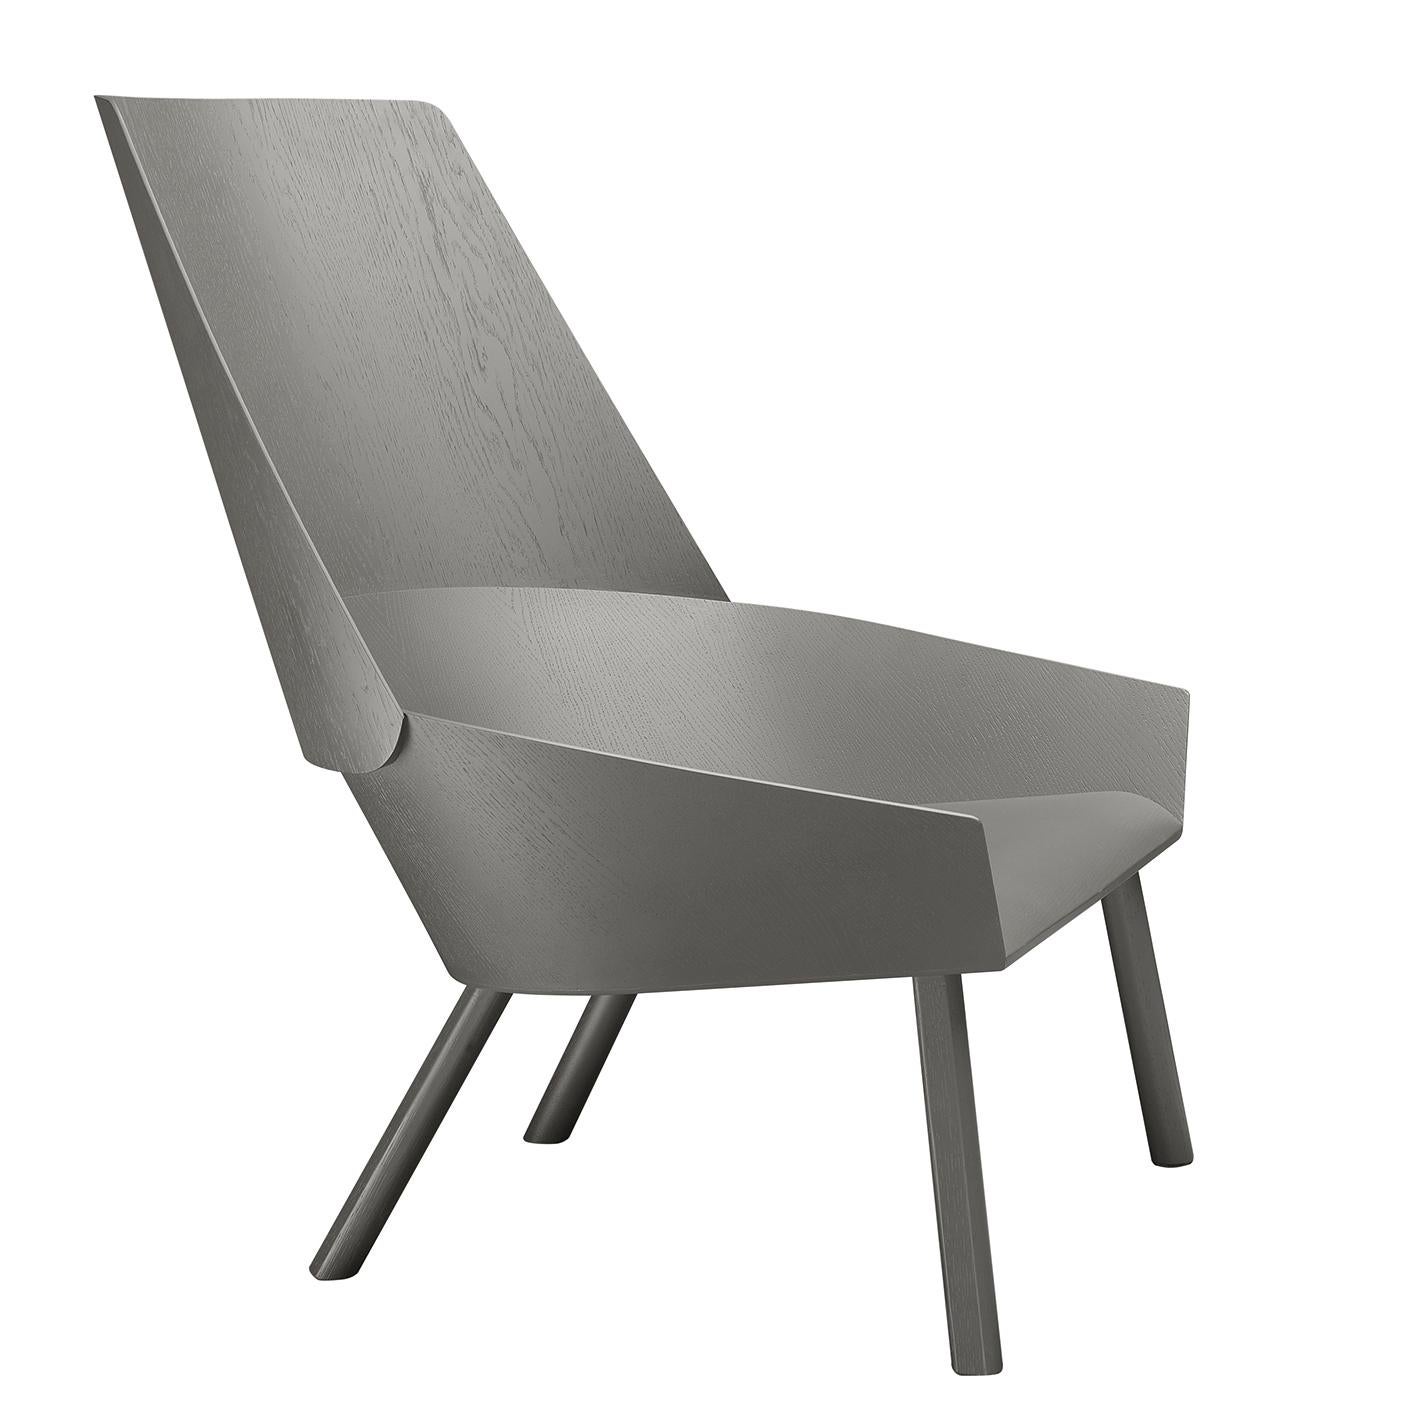 For Sale: Gray (Umbra Gray Lacquer) Customizable e15 Eugene Lounge Chair with Oak Base by Stefan Diez